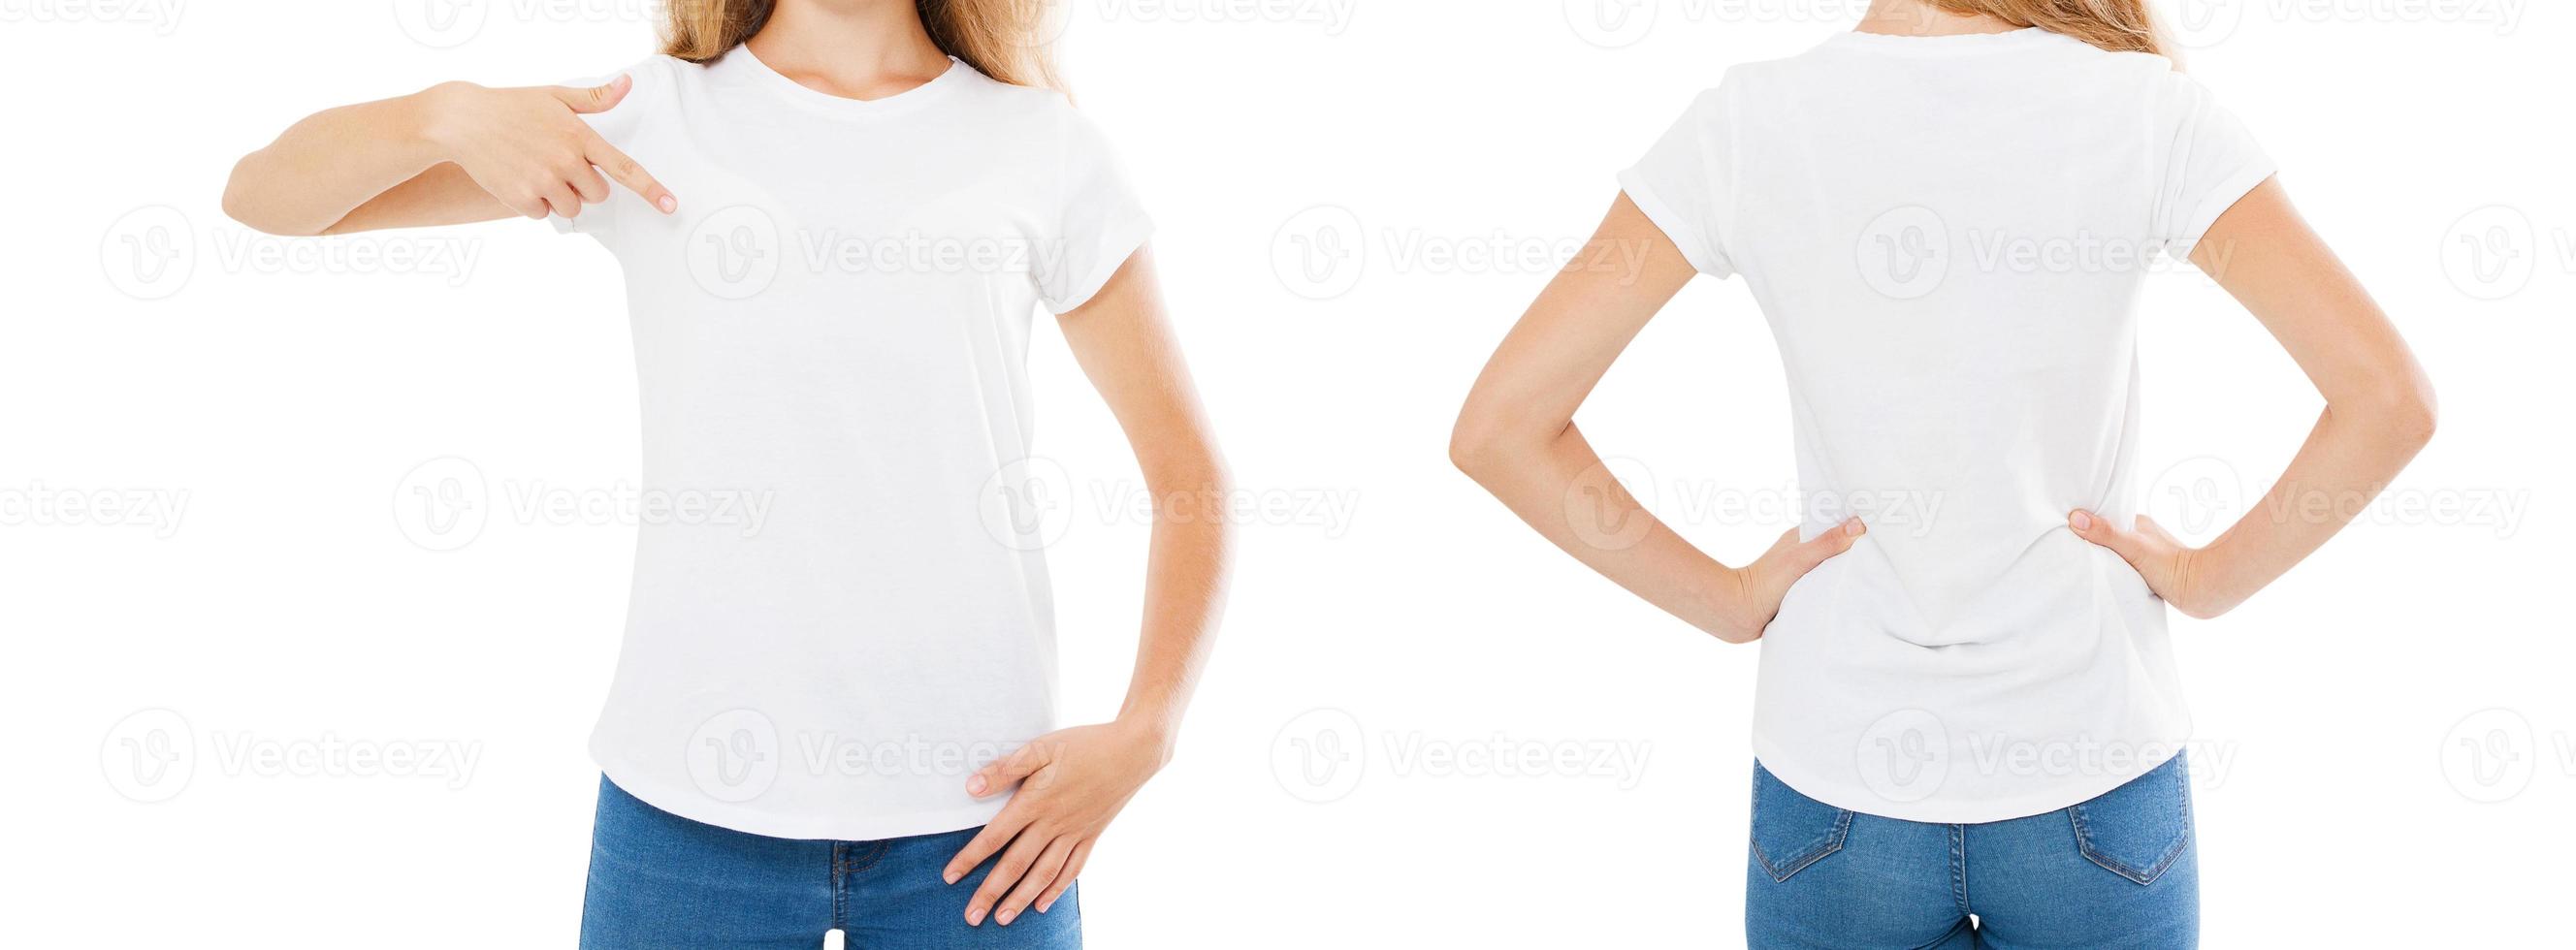 woman pointed on t shirt isolated on white background,mock up,cropped image photo